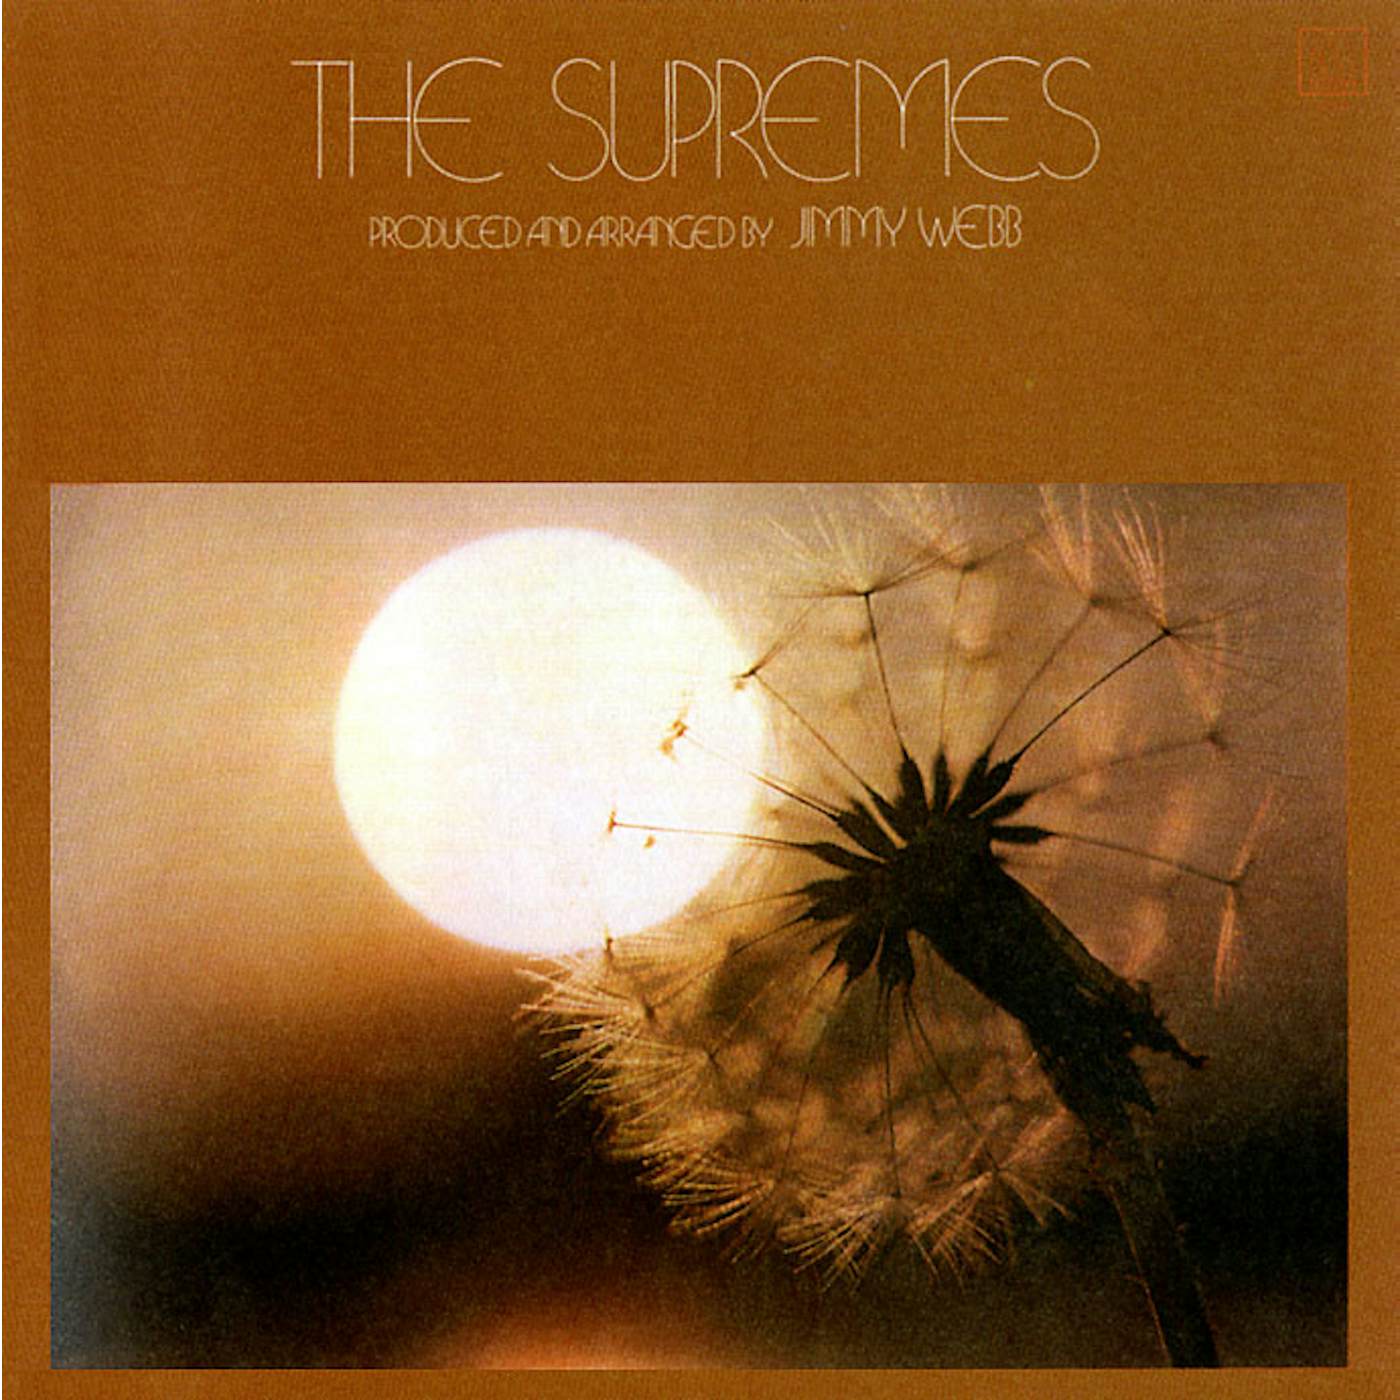 The Supremes PRODUCED & ARRANGED BY JIMMY WEBB CD